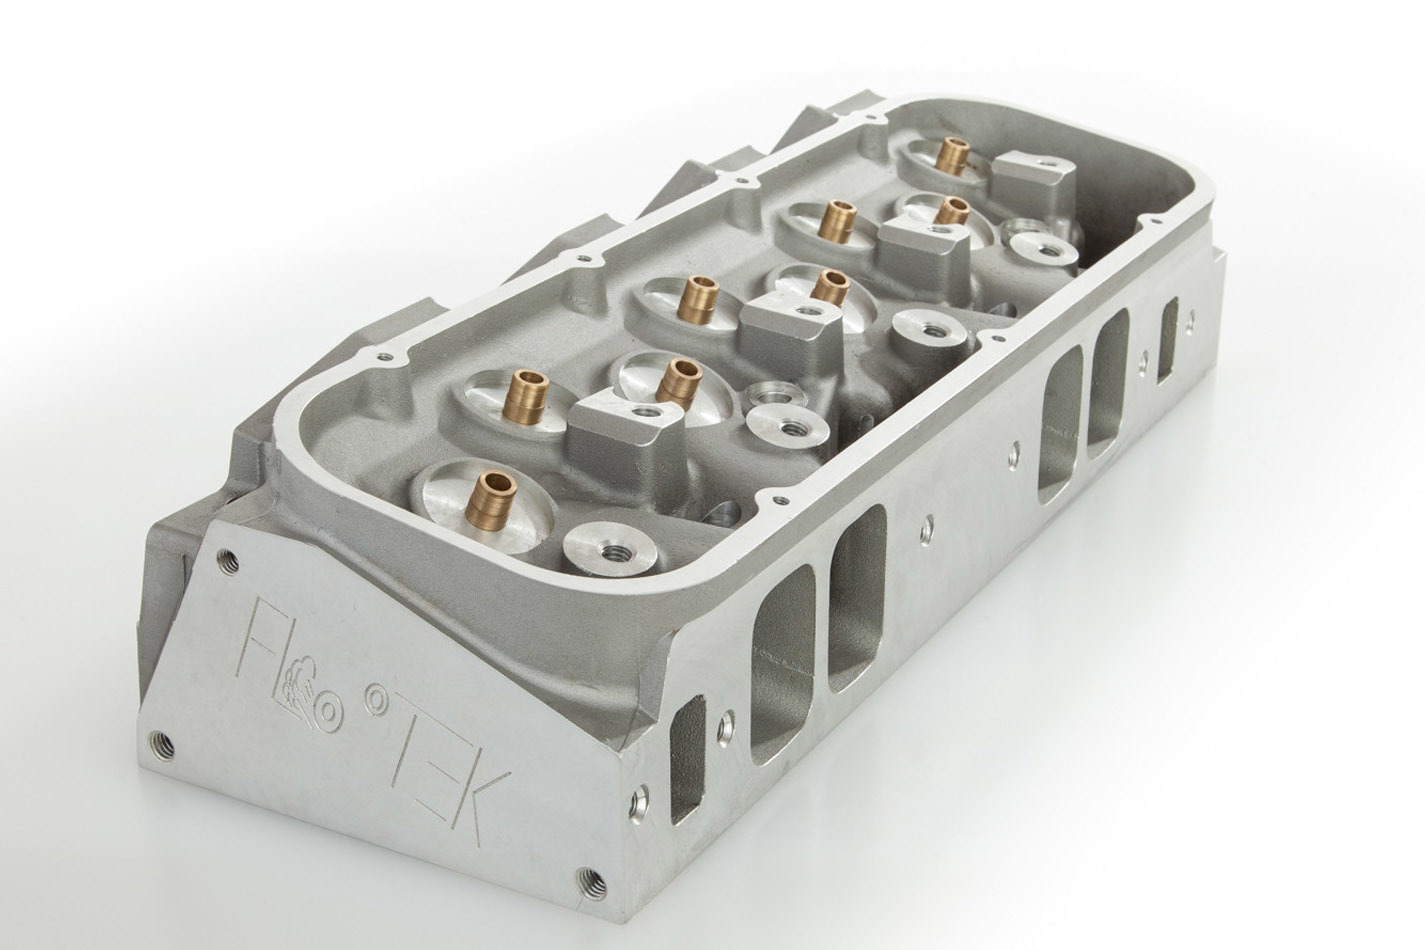 Flo Tek 360-6058 Cylinder Head, Assembled, 2.300 / 1.880 in Valves, 360 cc Intake, 121 cc Chamber, 1.620 in Springs, Aluminum, Big Block Chevy, Each